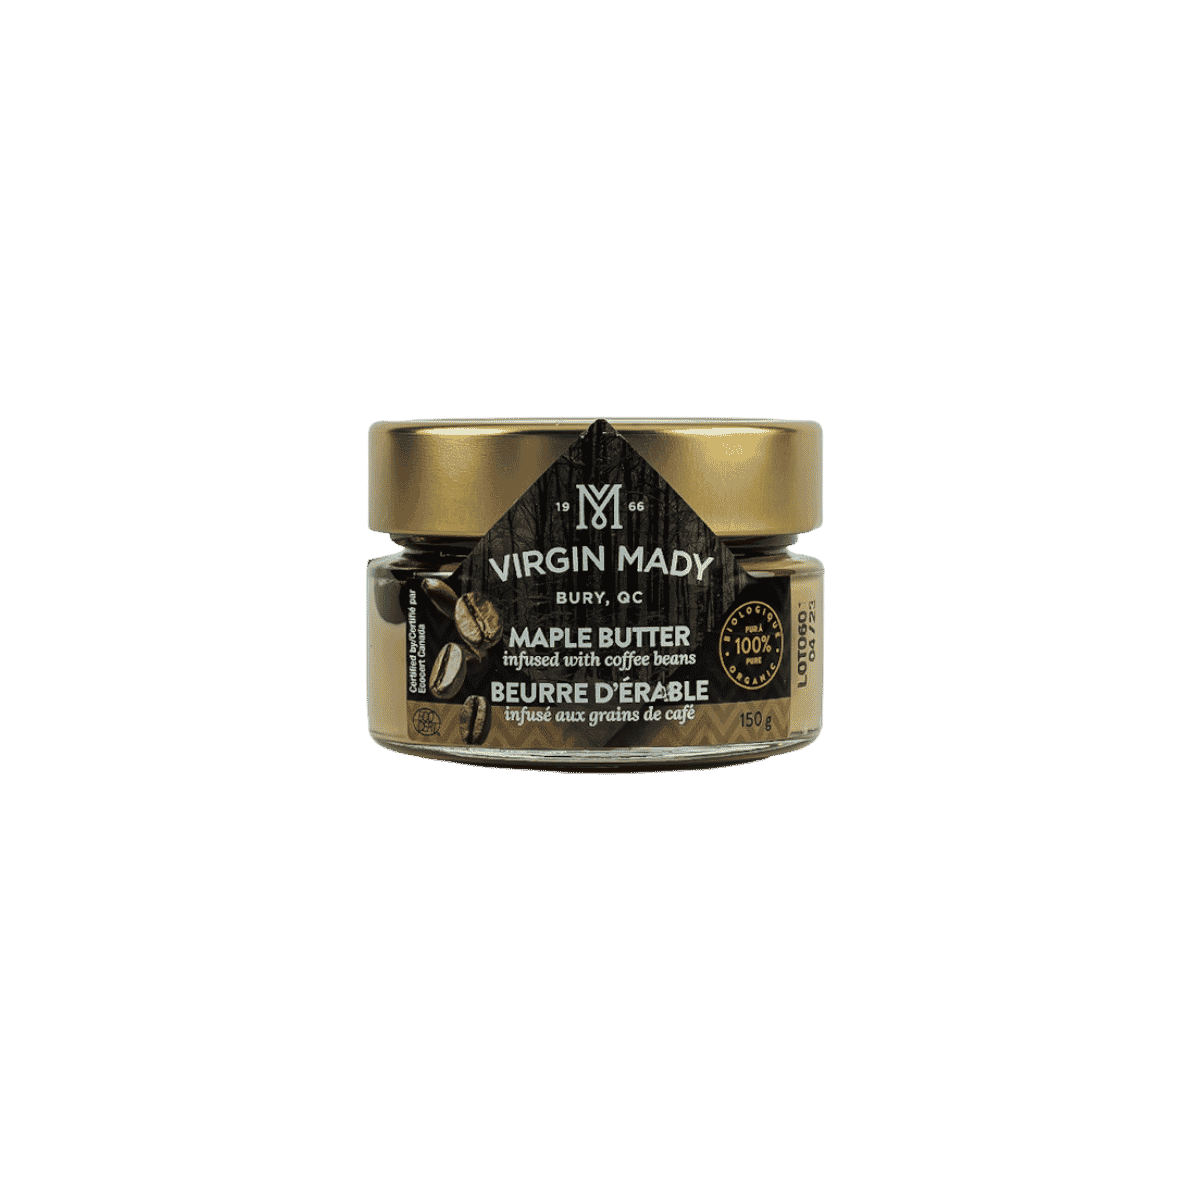 Virgin Mady Coffee-Infused Maple Butter